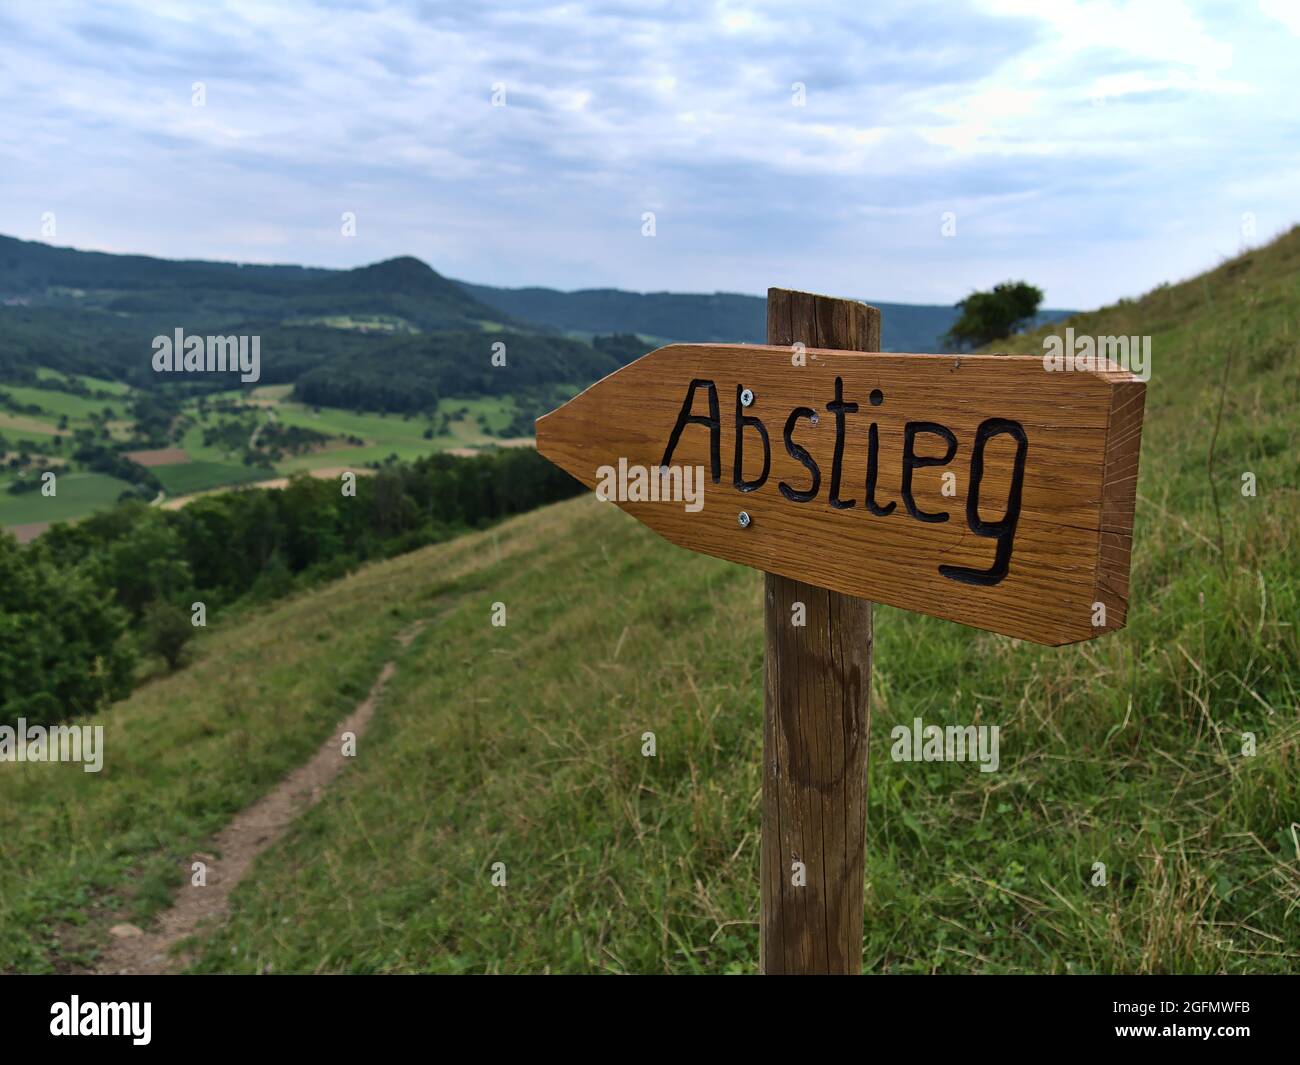 Closeup view of brown wooden sign with German text 'Abstieg' (descent) carved in the wood with hiking path on the slope of Limburg hill, Germany. Stock Photo